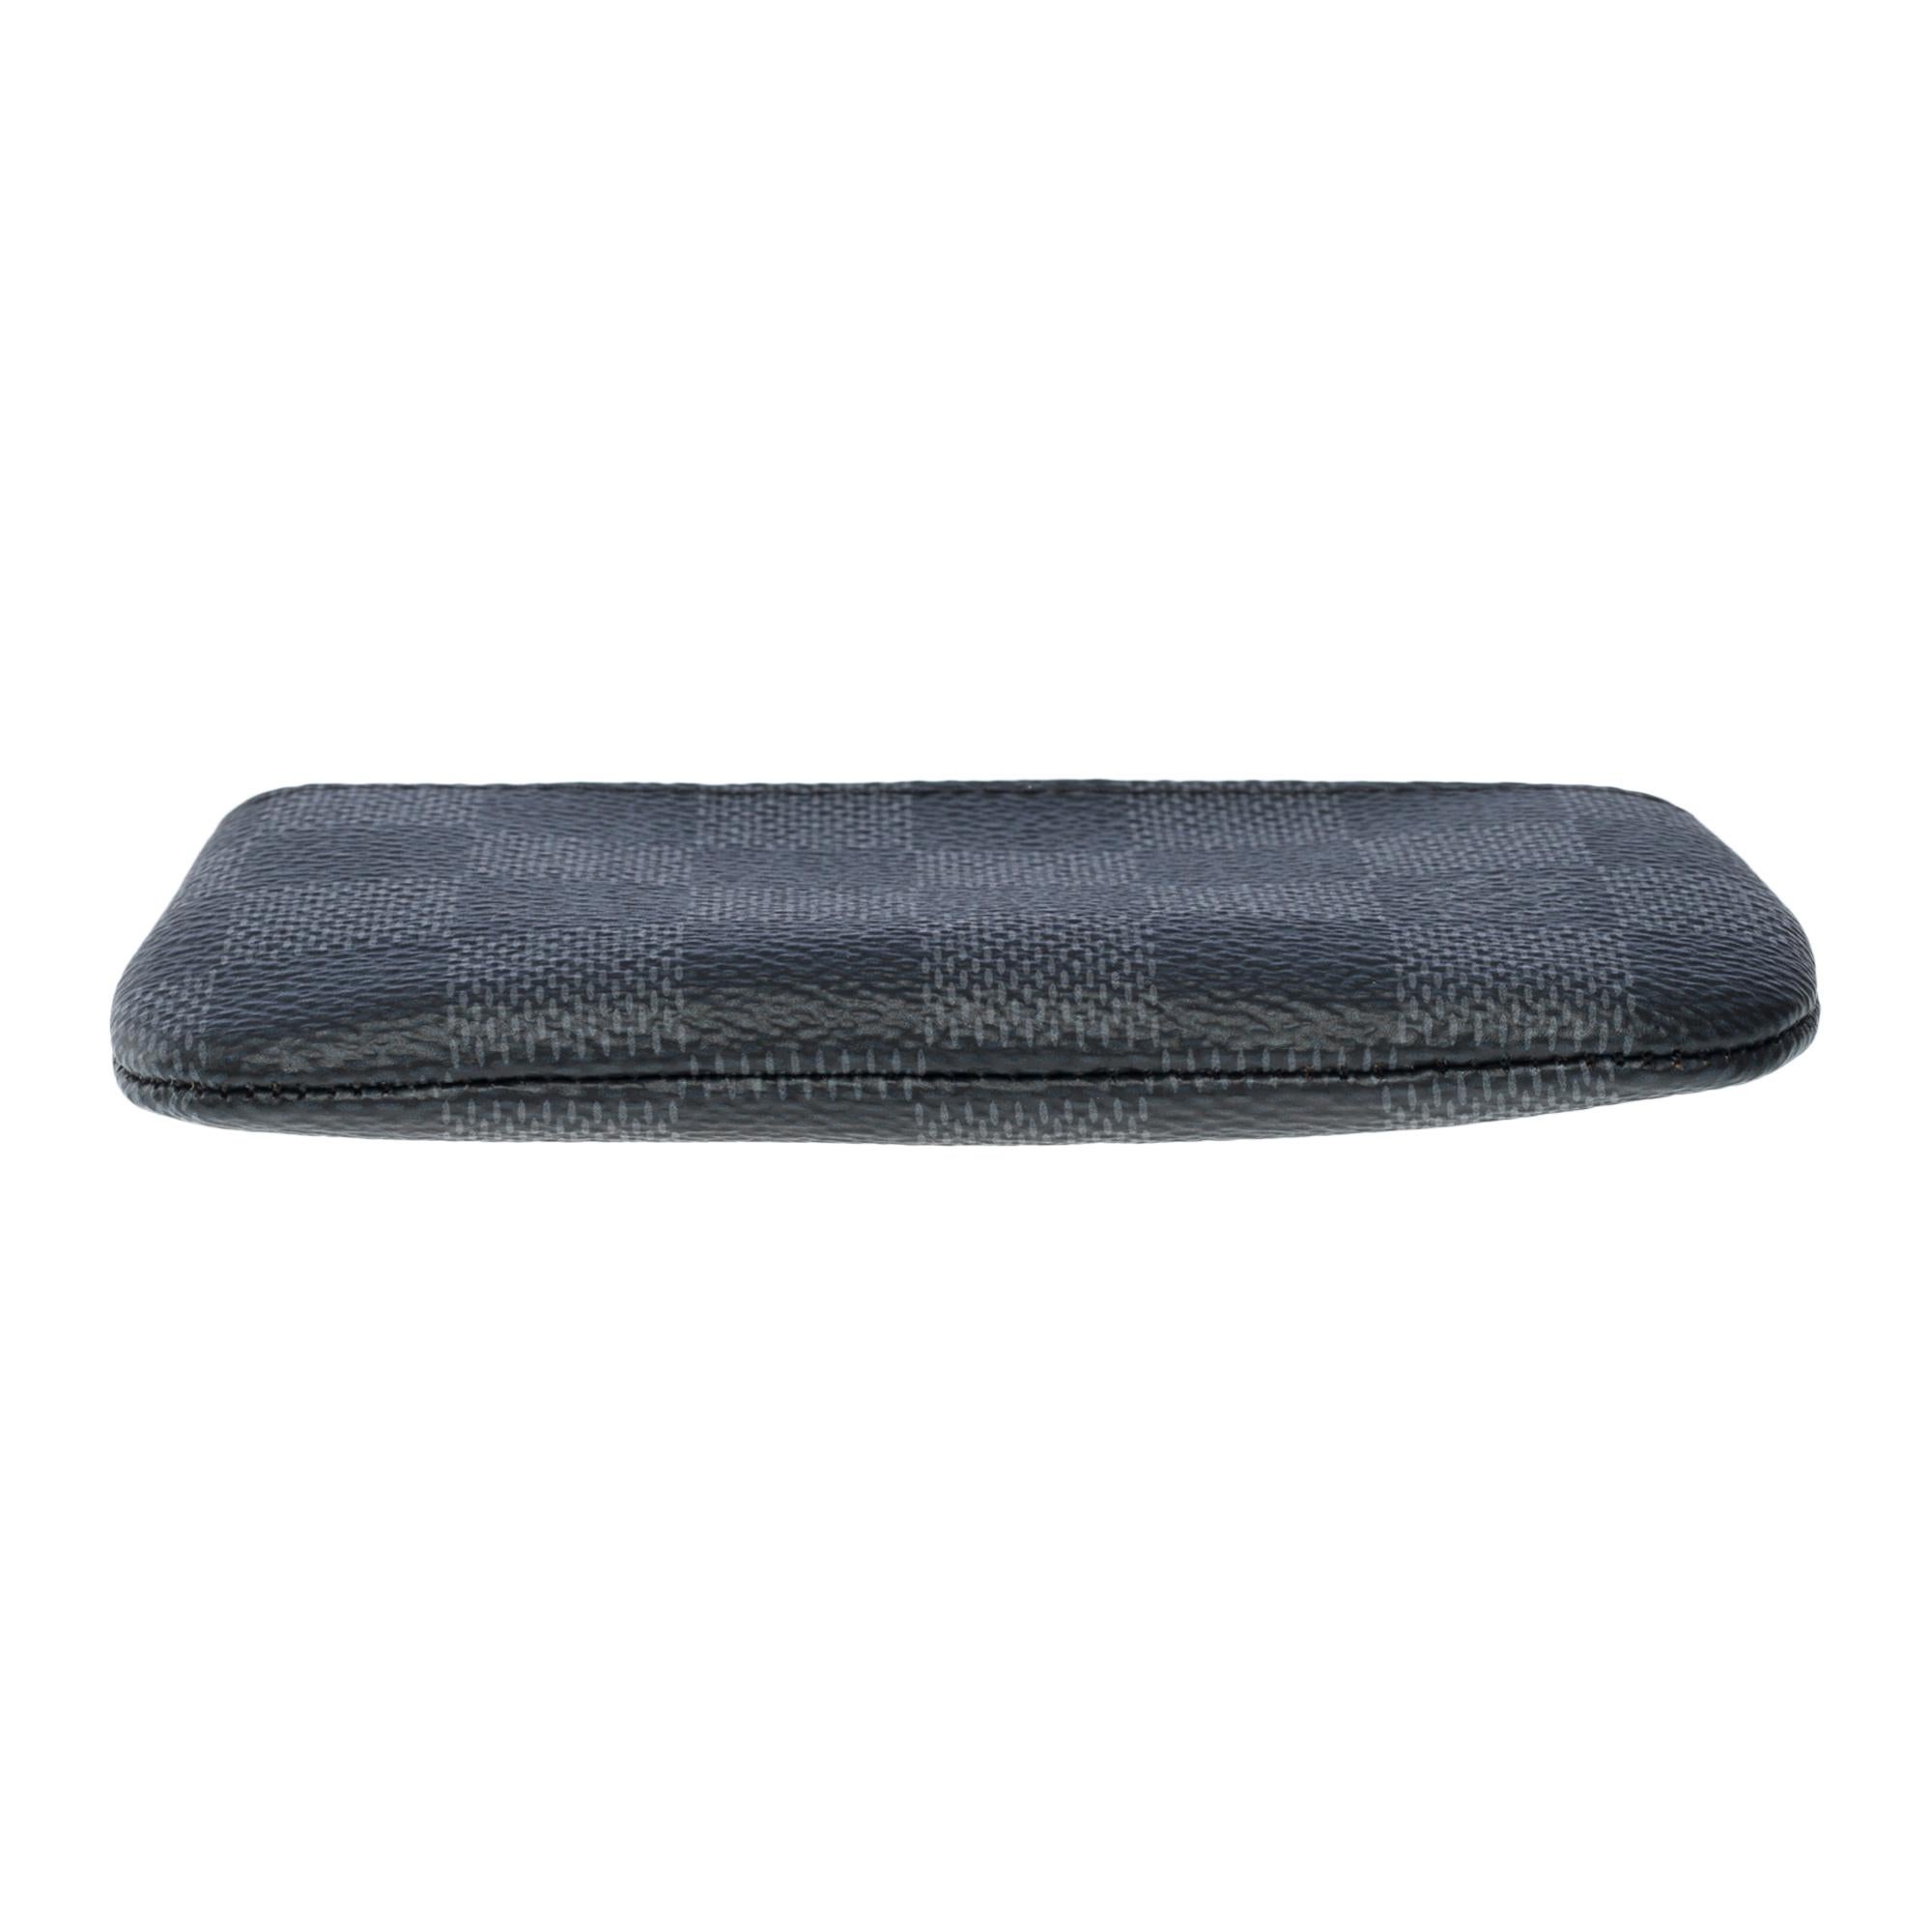 New Louis Vuitton Key Pouch in graphite damier canvas, SHW For Sale 3